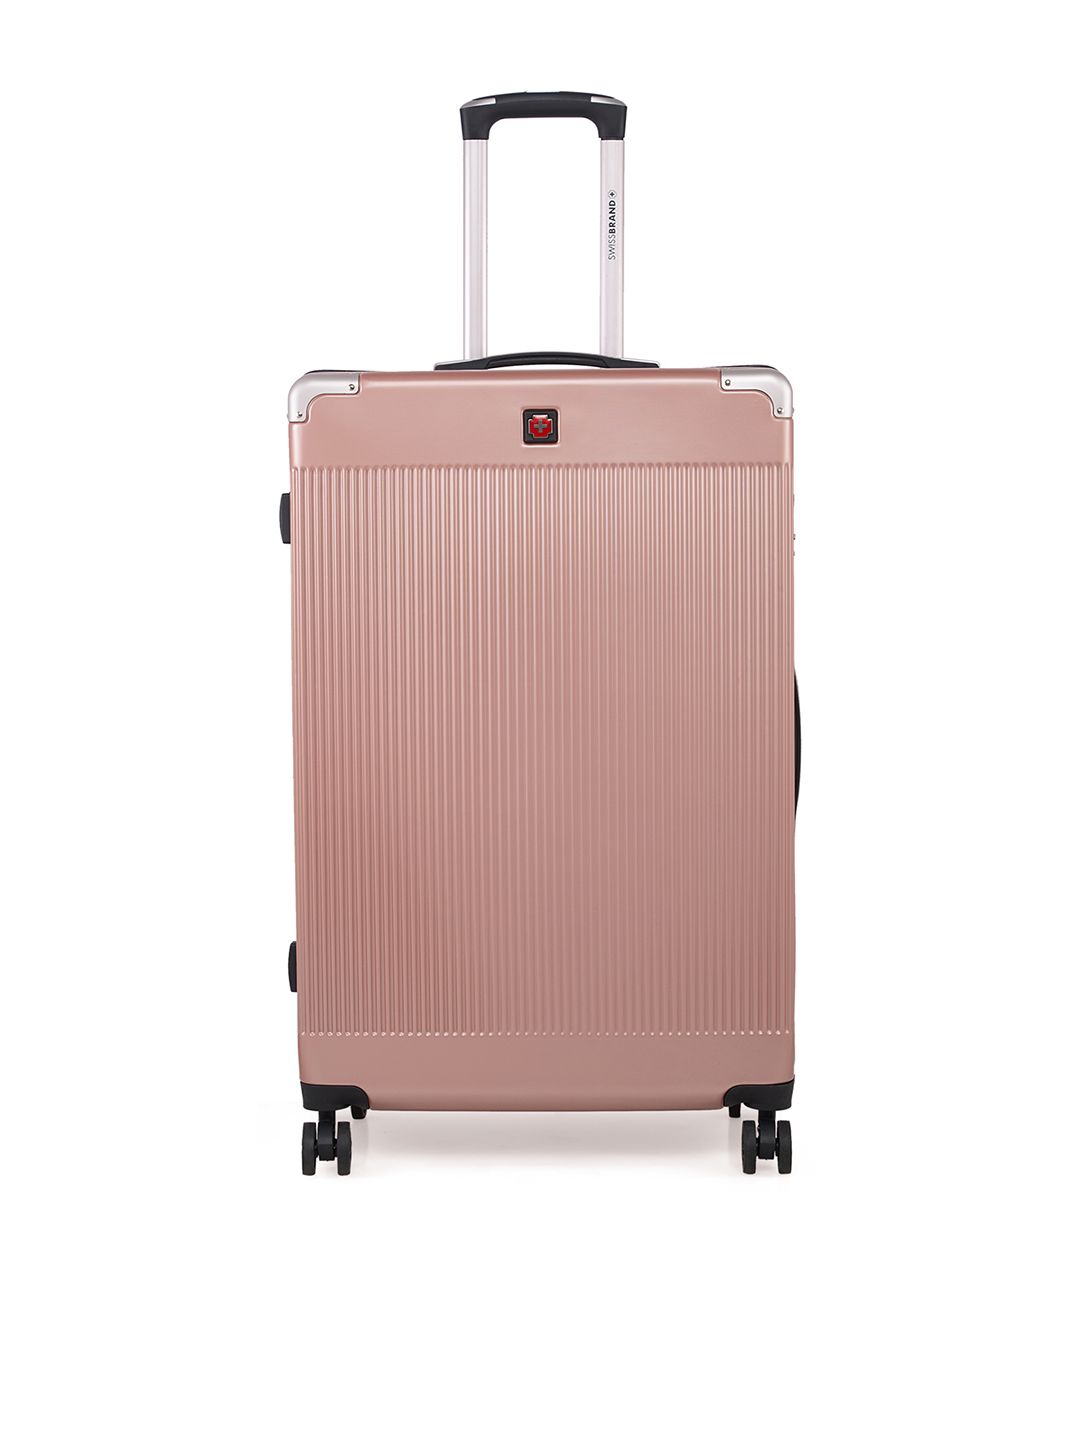 SWISS BRAND Rose Gold-Toned Range Case Large Size Trolley Bag Price in India